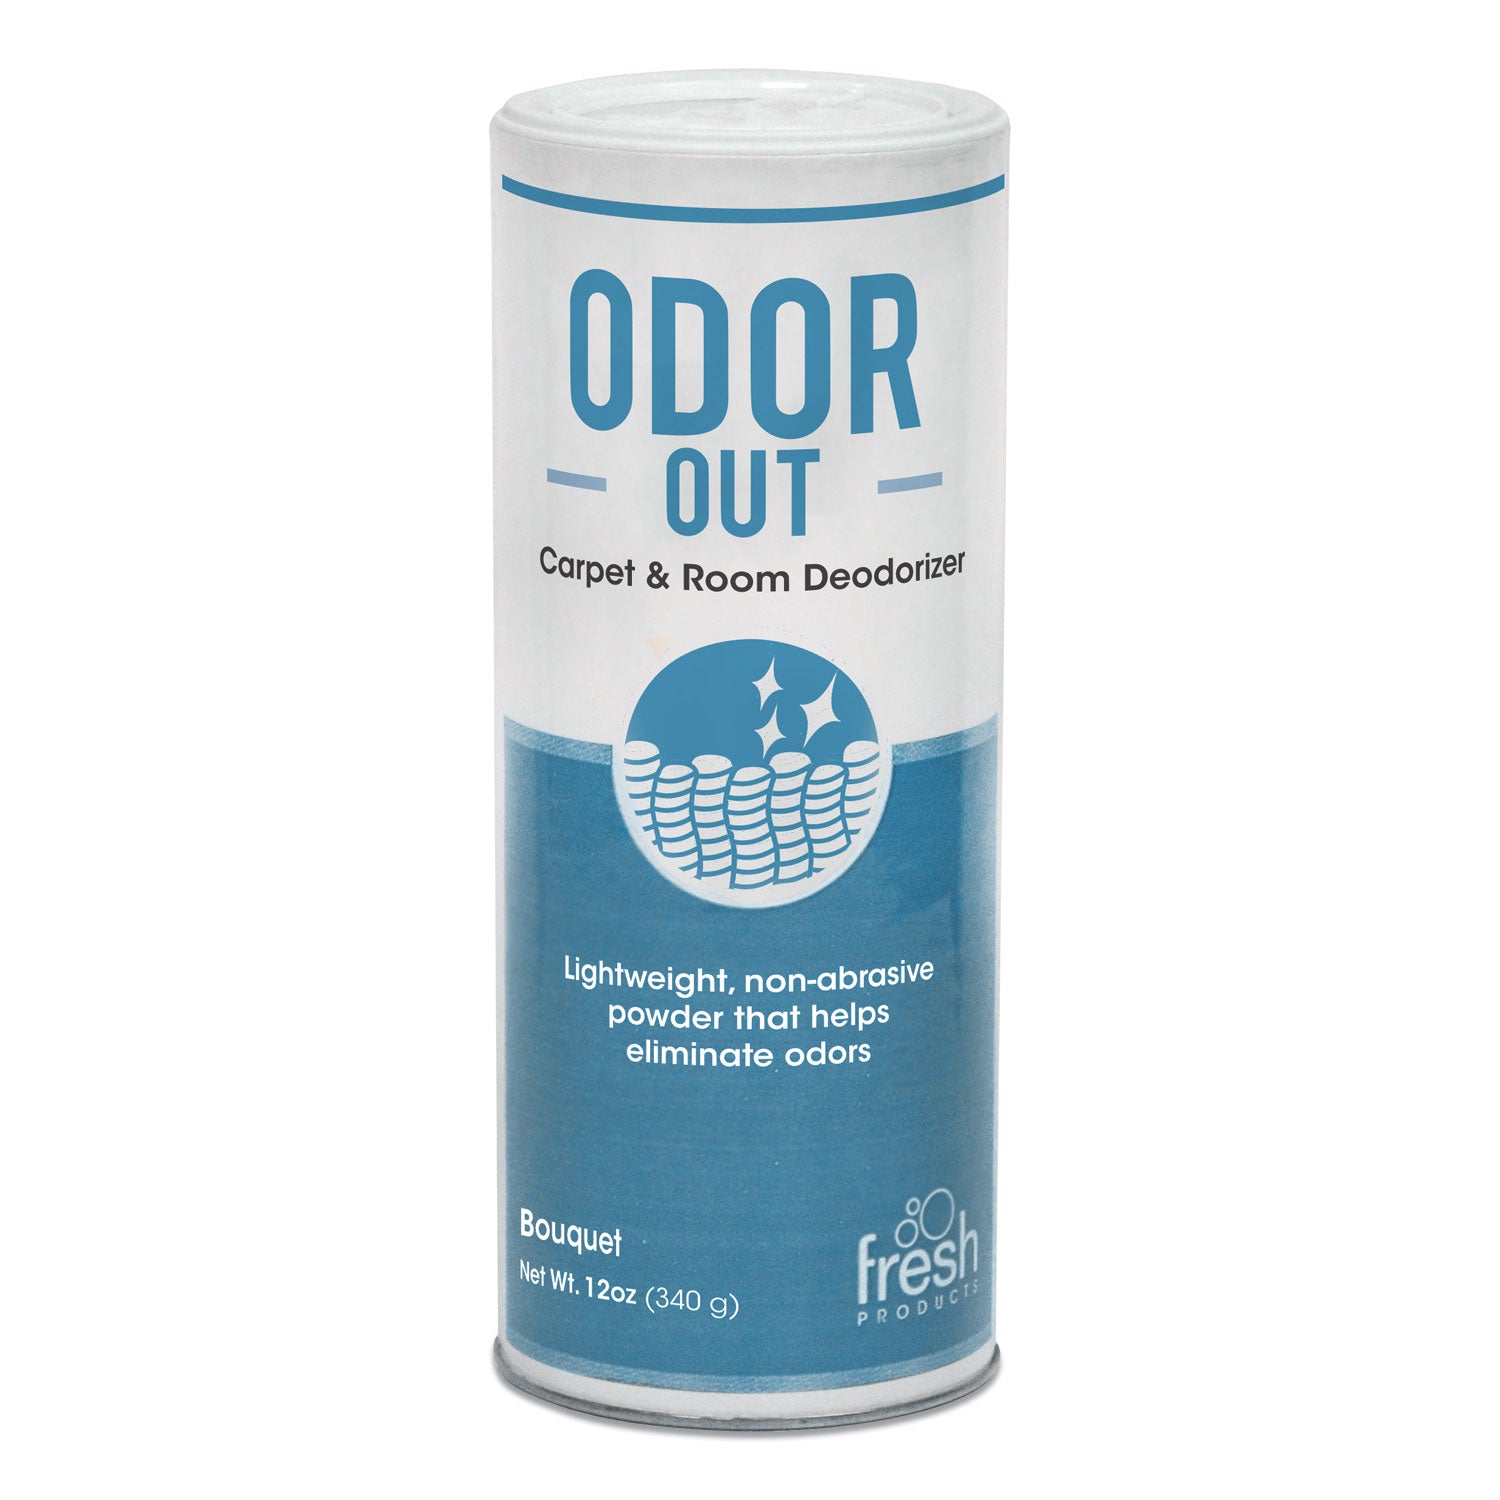 Odor-Out Rug/Room Deodorant, Bouquet, 12 oz, Shaker Can, 12/Box - 1